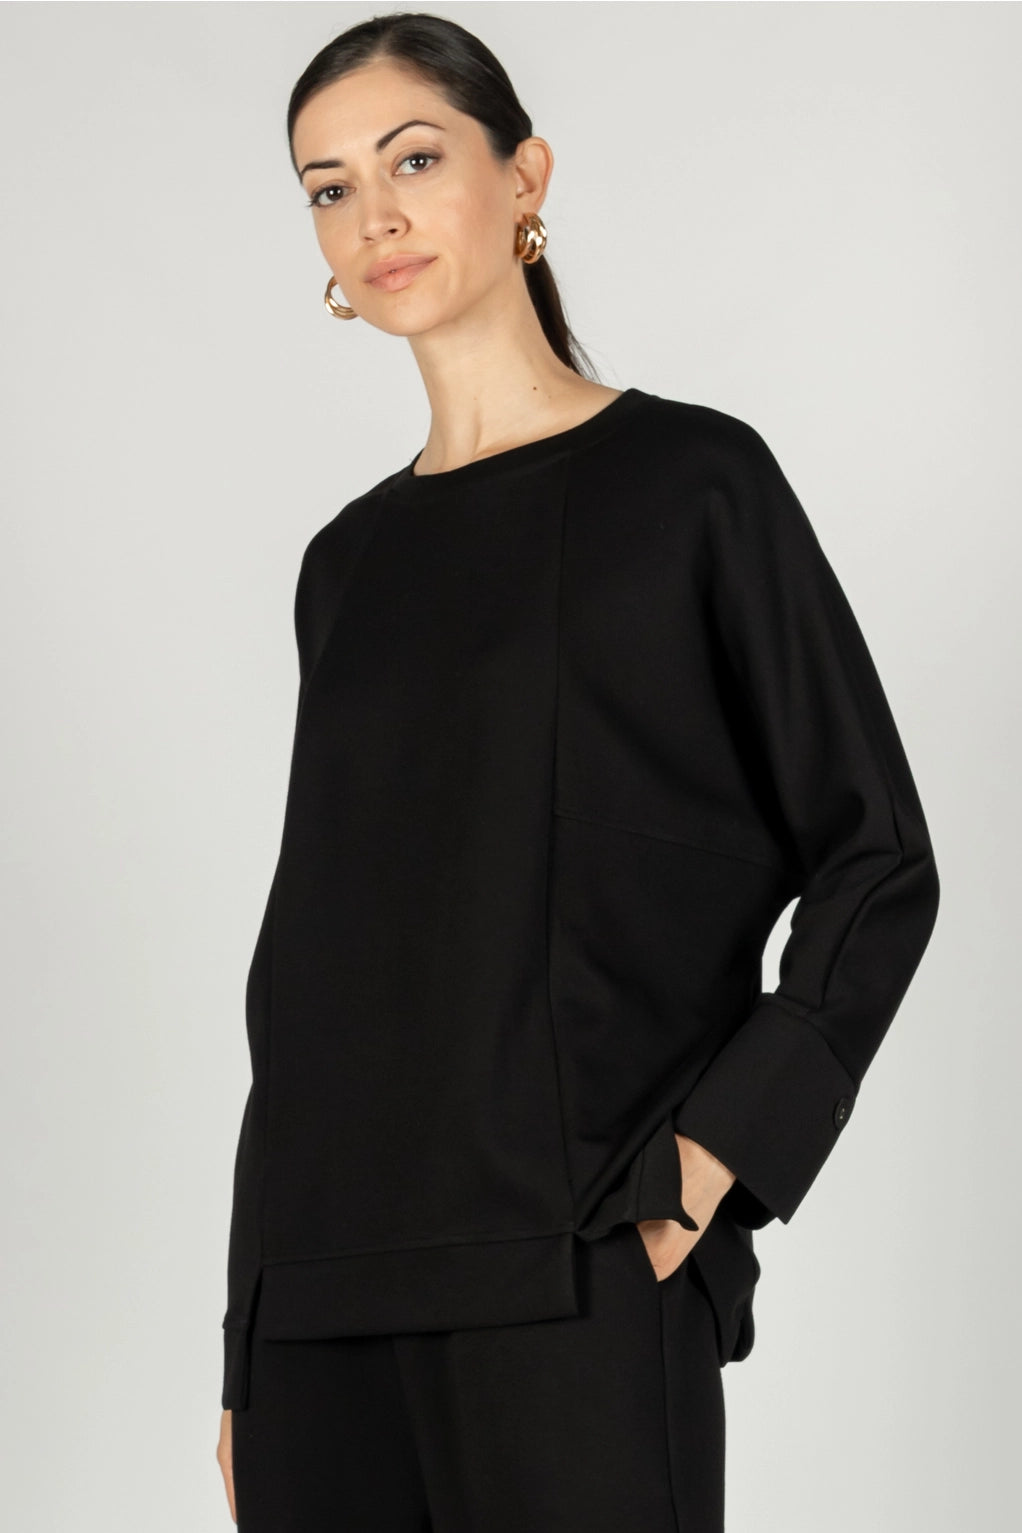 Butter Modal Dolman Sleeve Top- Two Colors